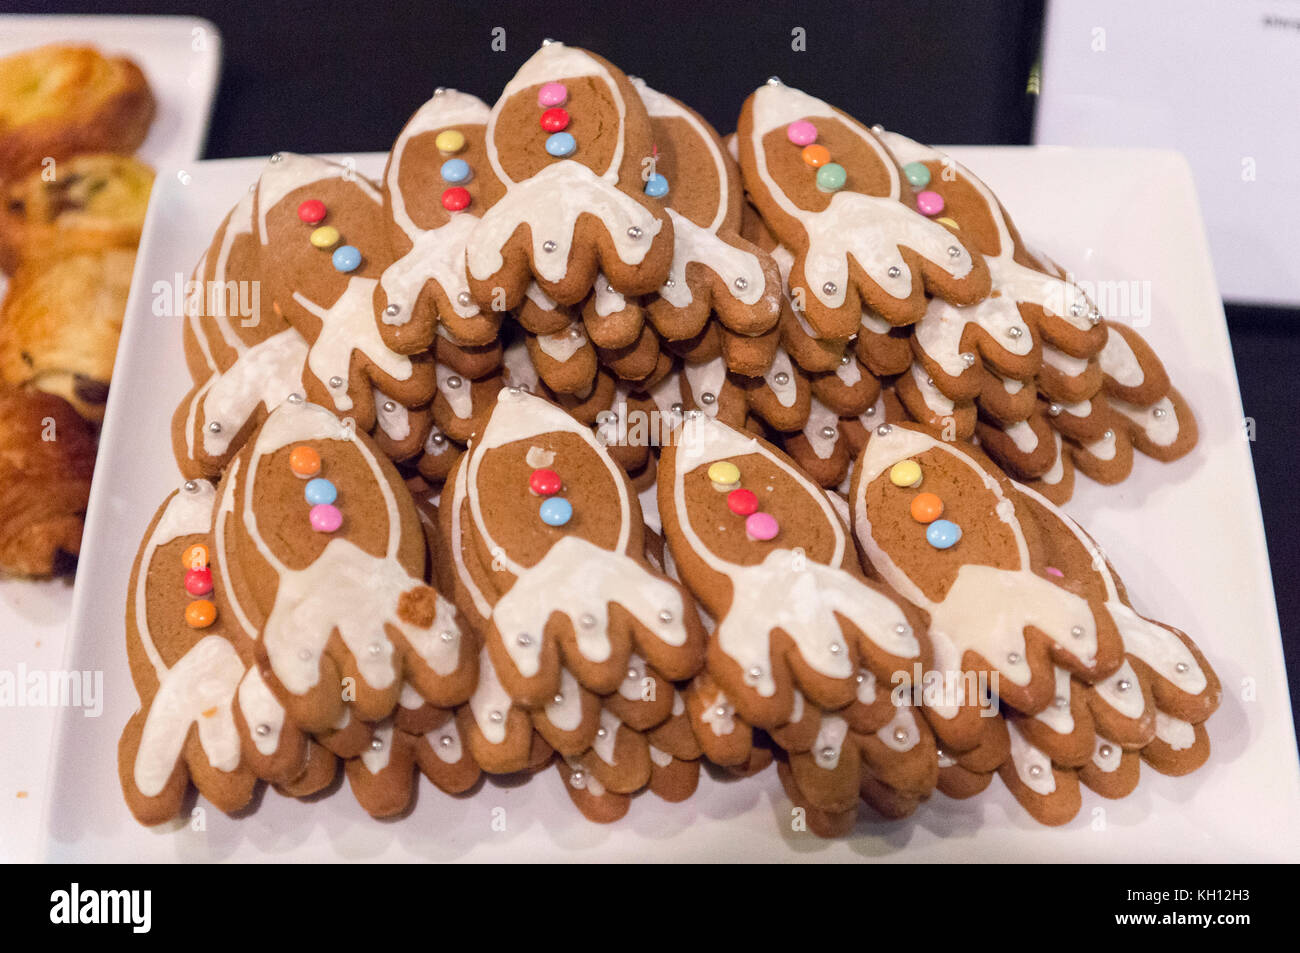 Science Museum, London, UK. 13 November, 2017. An exhibition marking 60 years to the day since British scientists launched the Skylark rocket programme, exploring the story behind one of the longest and most successful rocket programmes in the world, with Britain launching a total of 441 Skylark missions. Rocket shaped biscuits at the press launch. Credit: Malcolm Park/Alamy Live News. Stock Photo